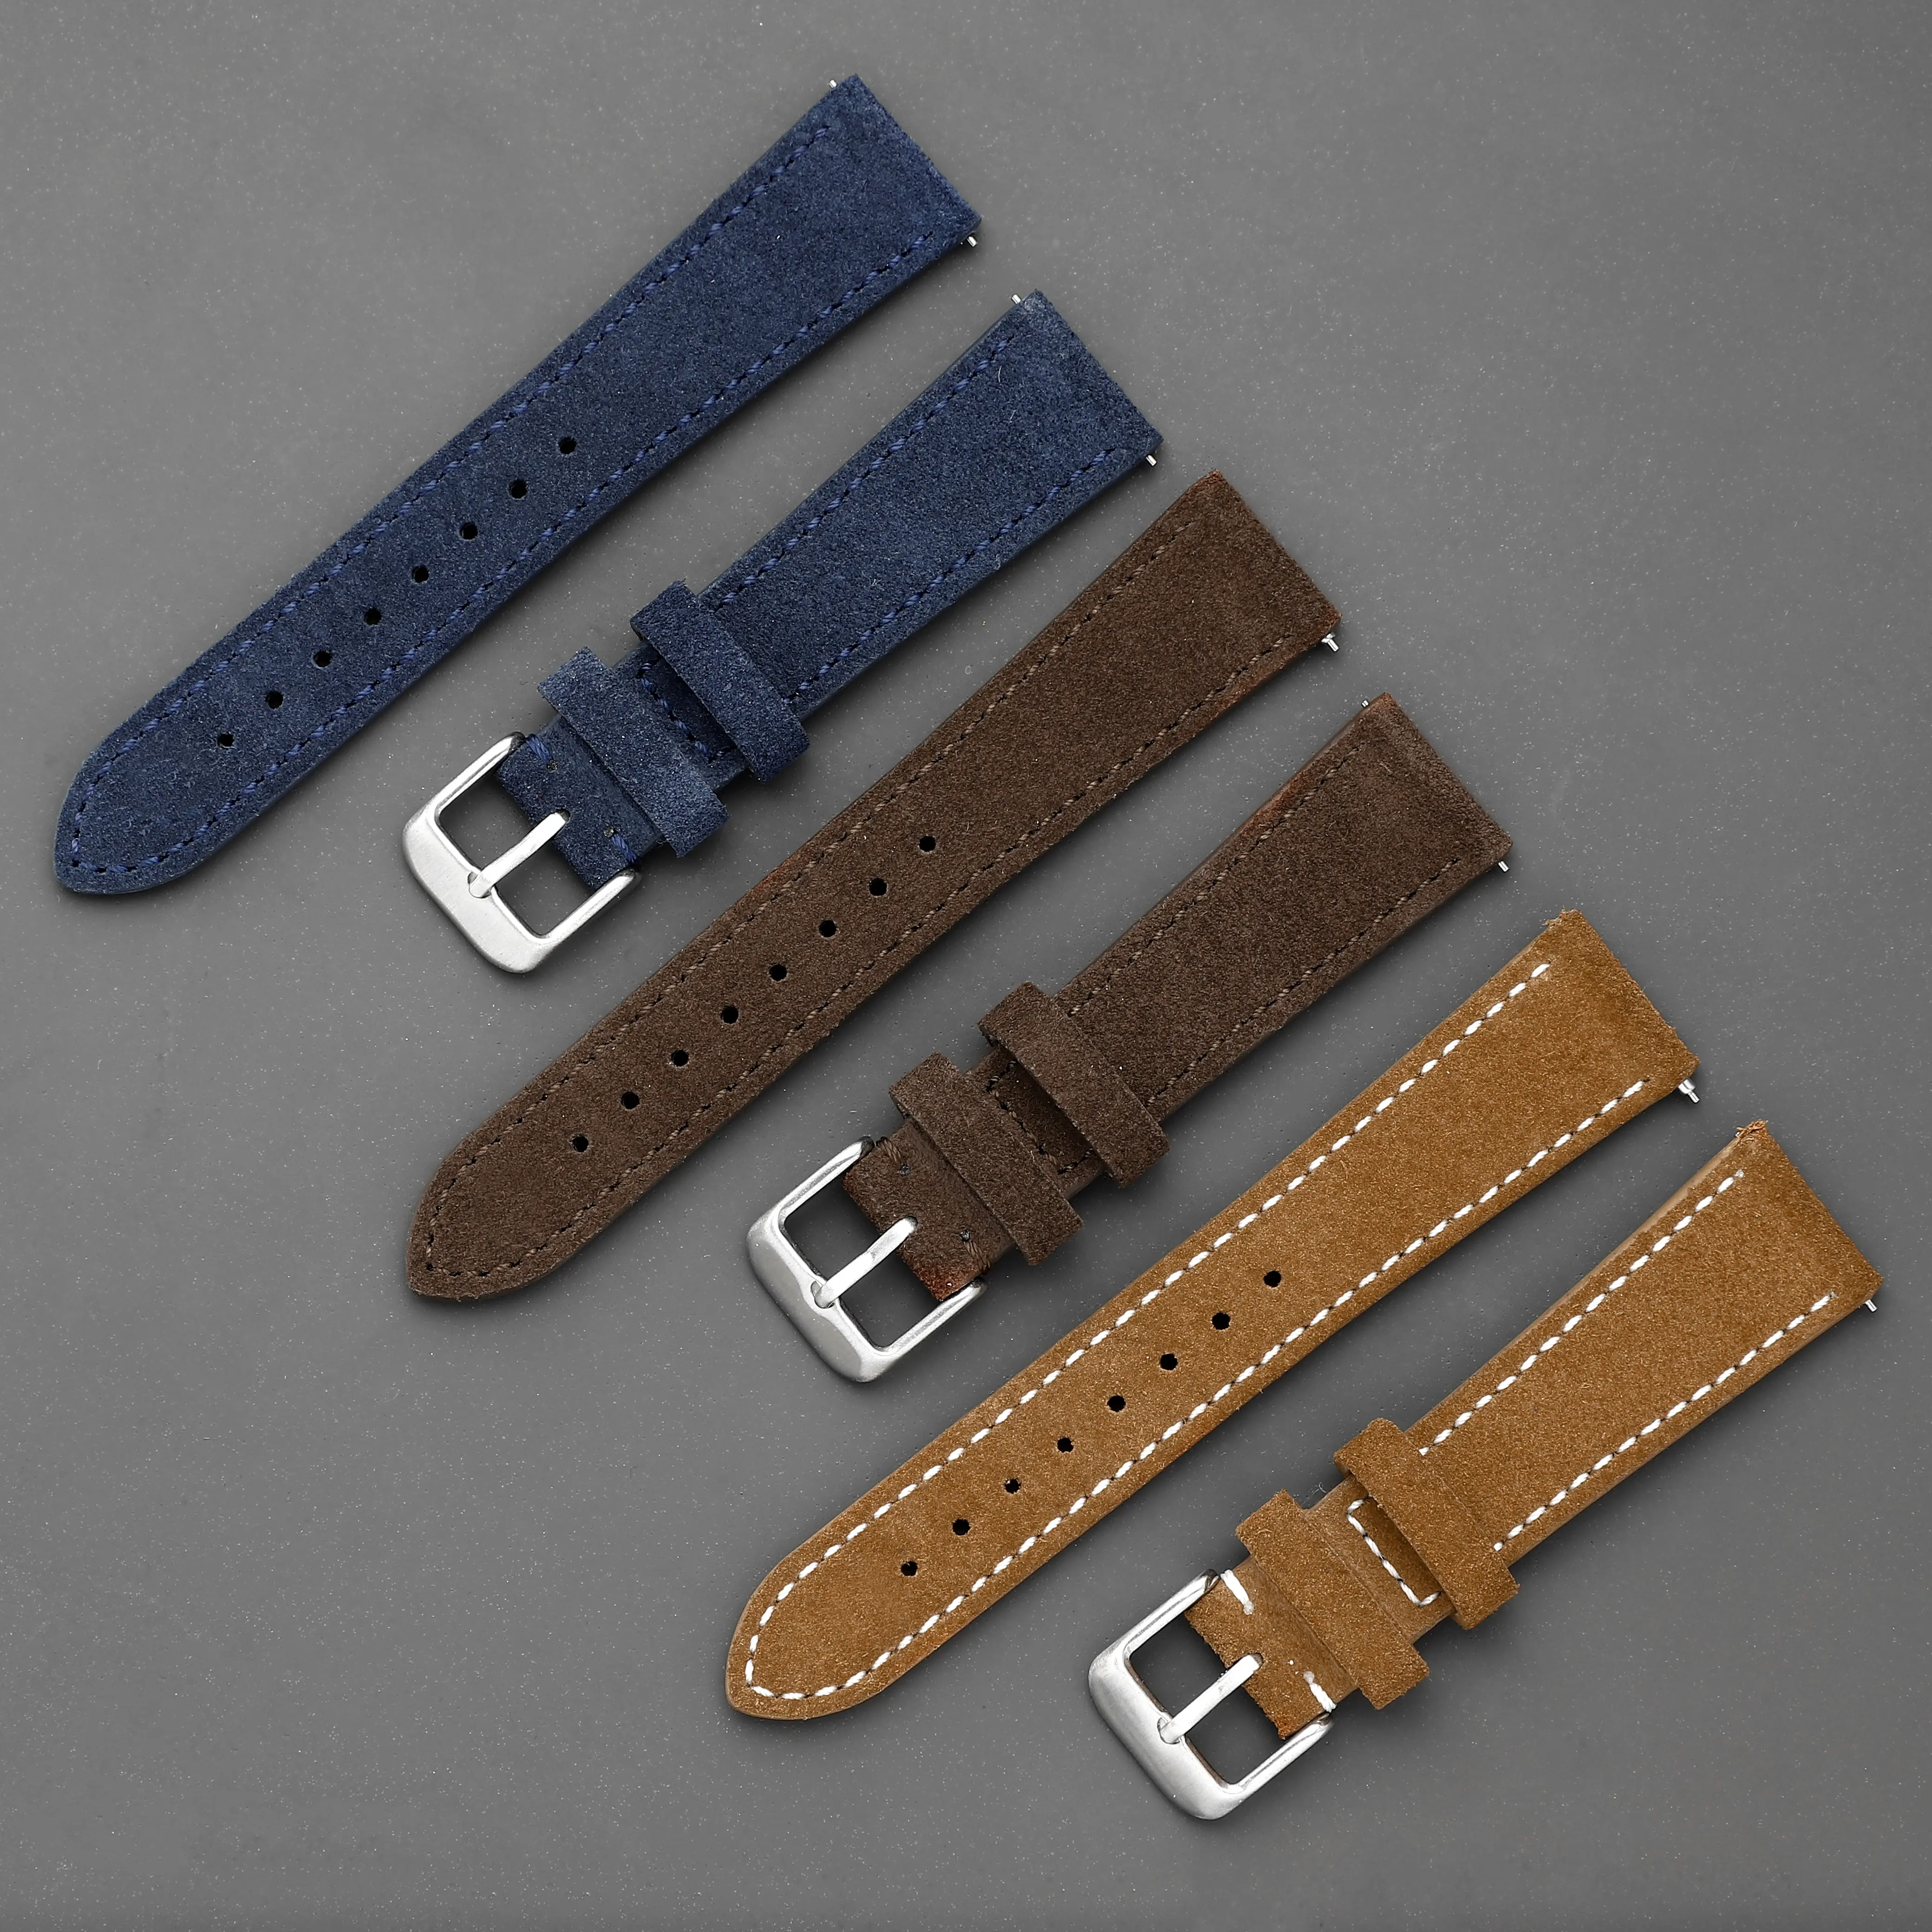 LAIHE Custom Quick Release Vintage Luxury Suede Wrist 20mm Watchband Calf Cow Leather Watch Straps Bands